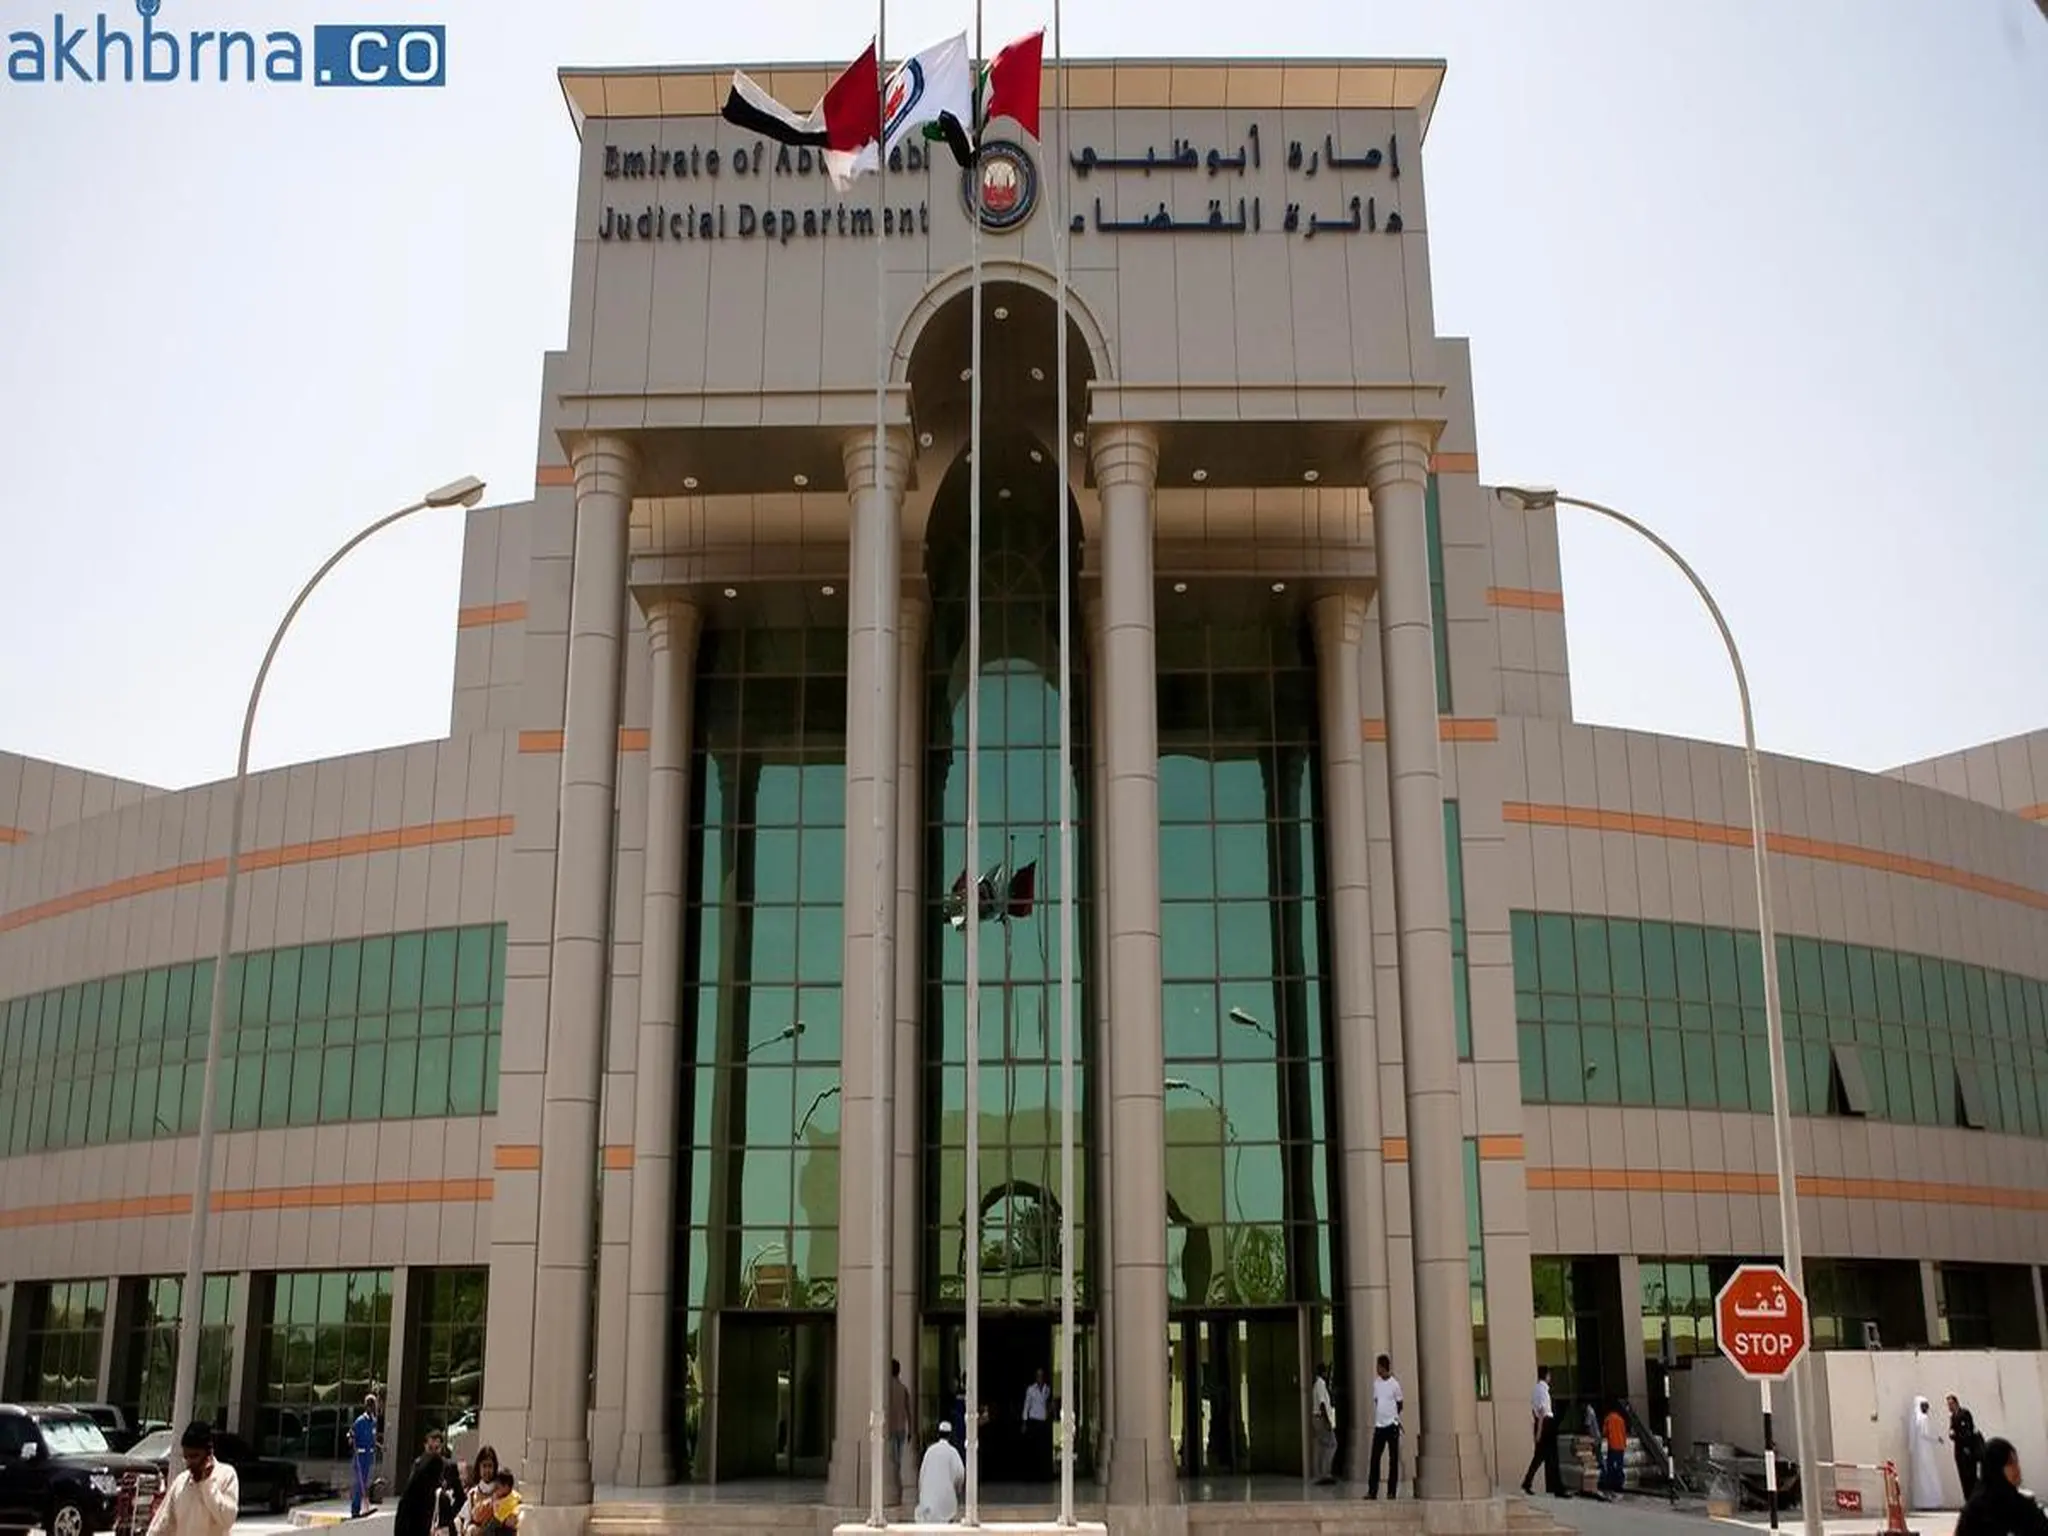 A young man ordered to pay 62,000 AED refund and 1,500 AED compensation in Abu Dhabi